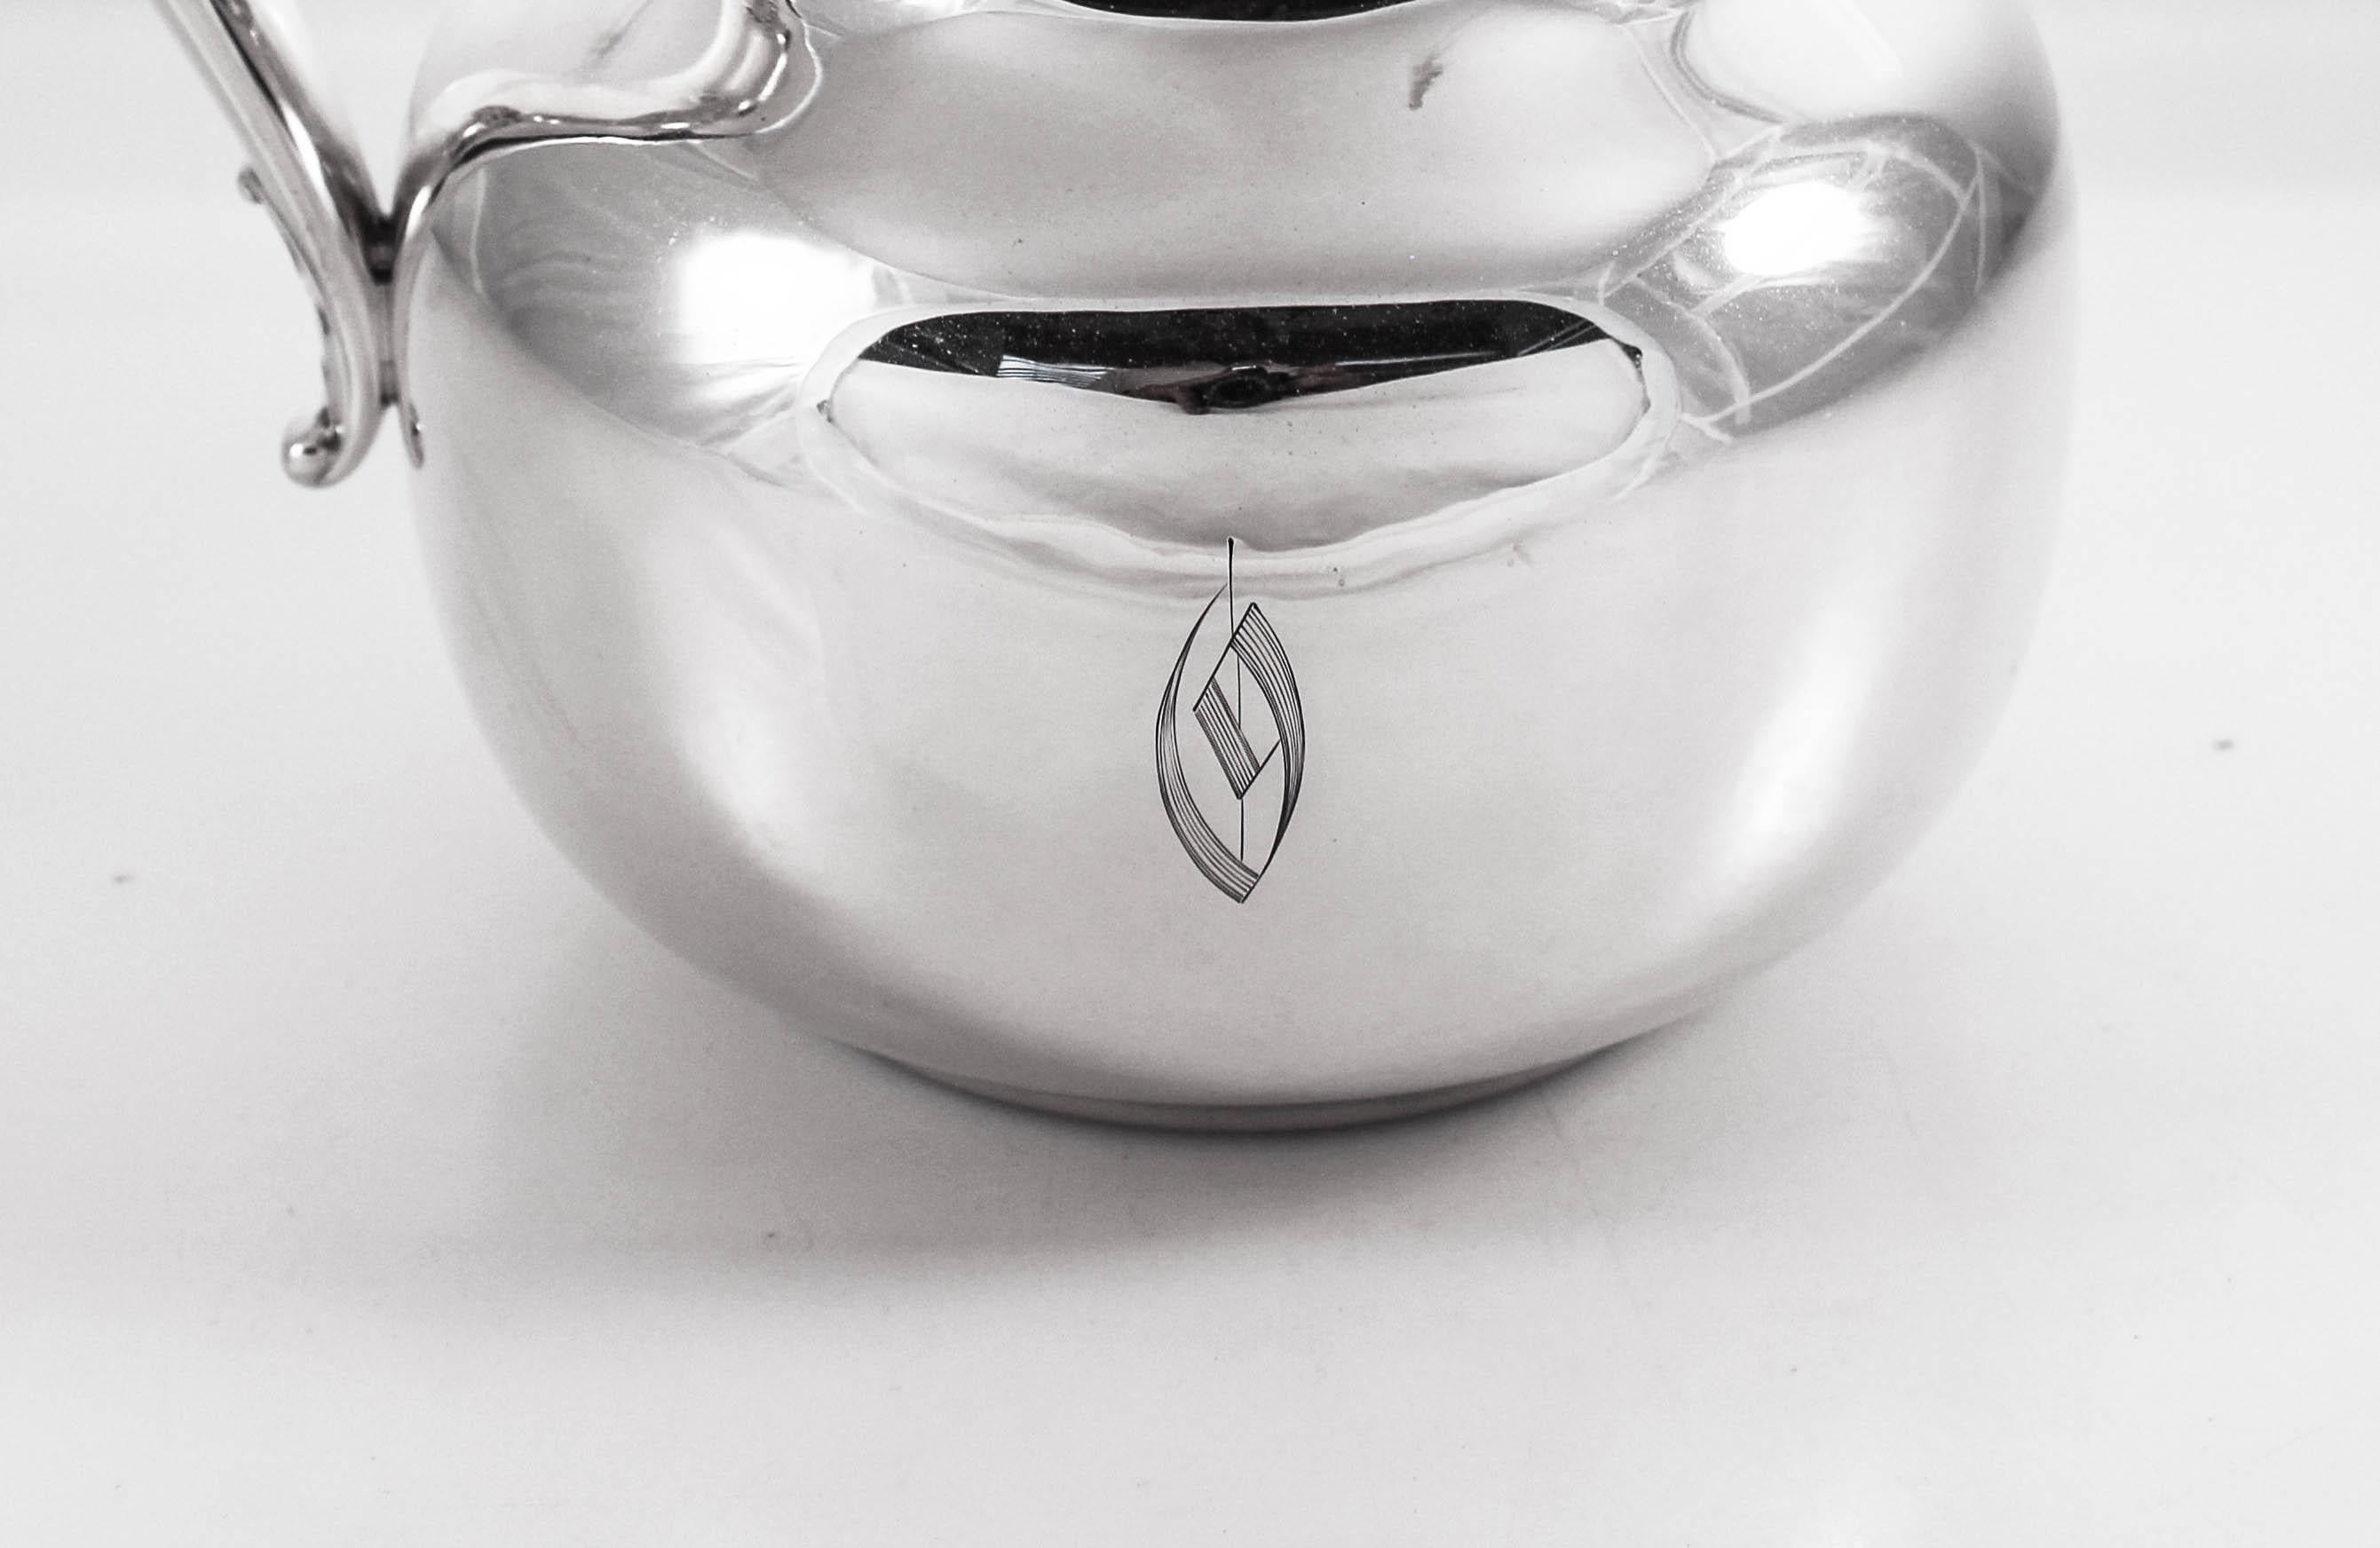 This sterling silver water pitcher is signed 1908; that’s one hundred and twelve years ago. We had it restored to its original beauty— dents and scratches removed and polished to perfection. Now it’s ready to dress up your dining room table! It has